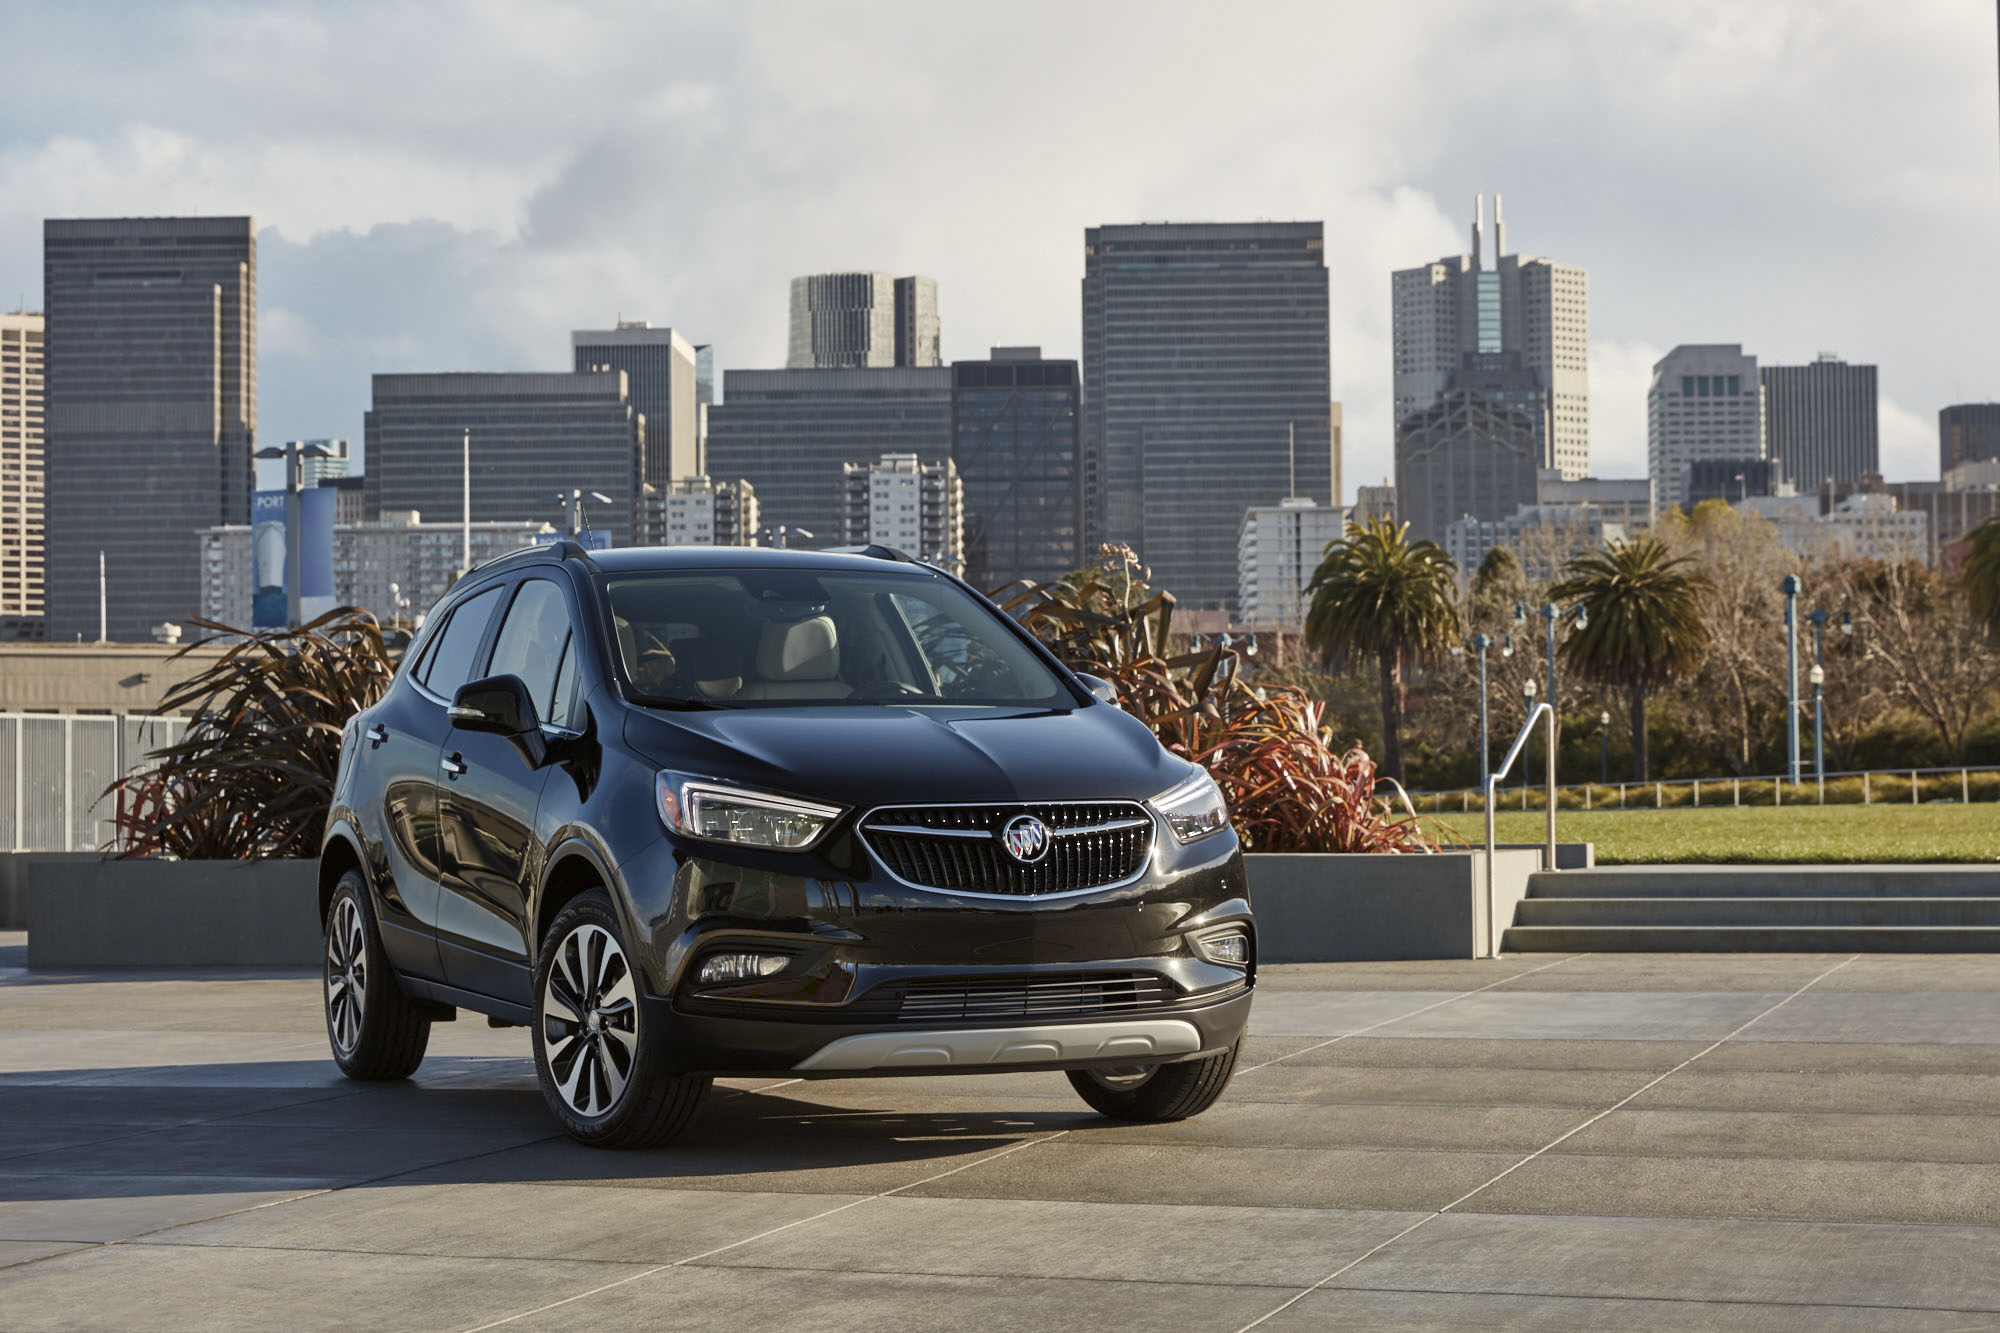 Buick Encores available in Boise, ID at Peterson Chevrolet Buick Cadillac